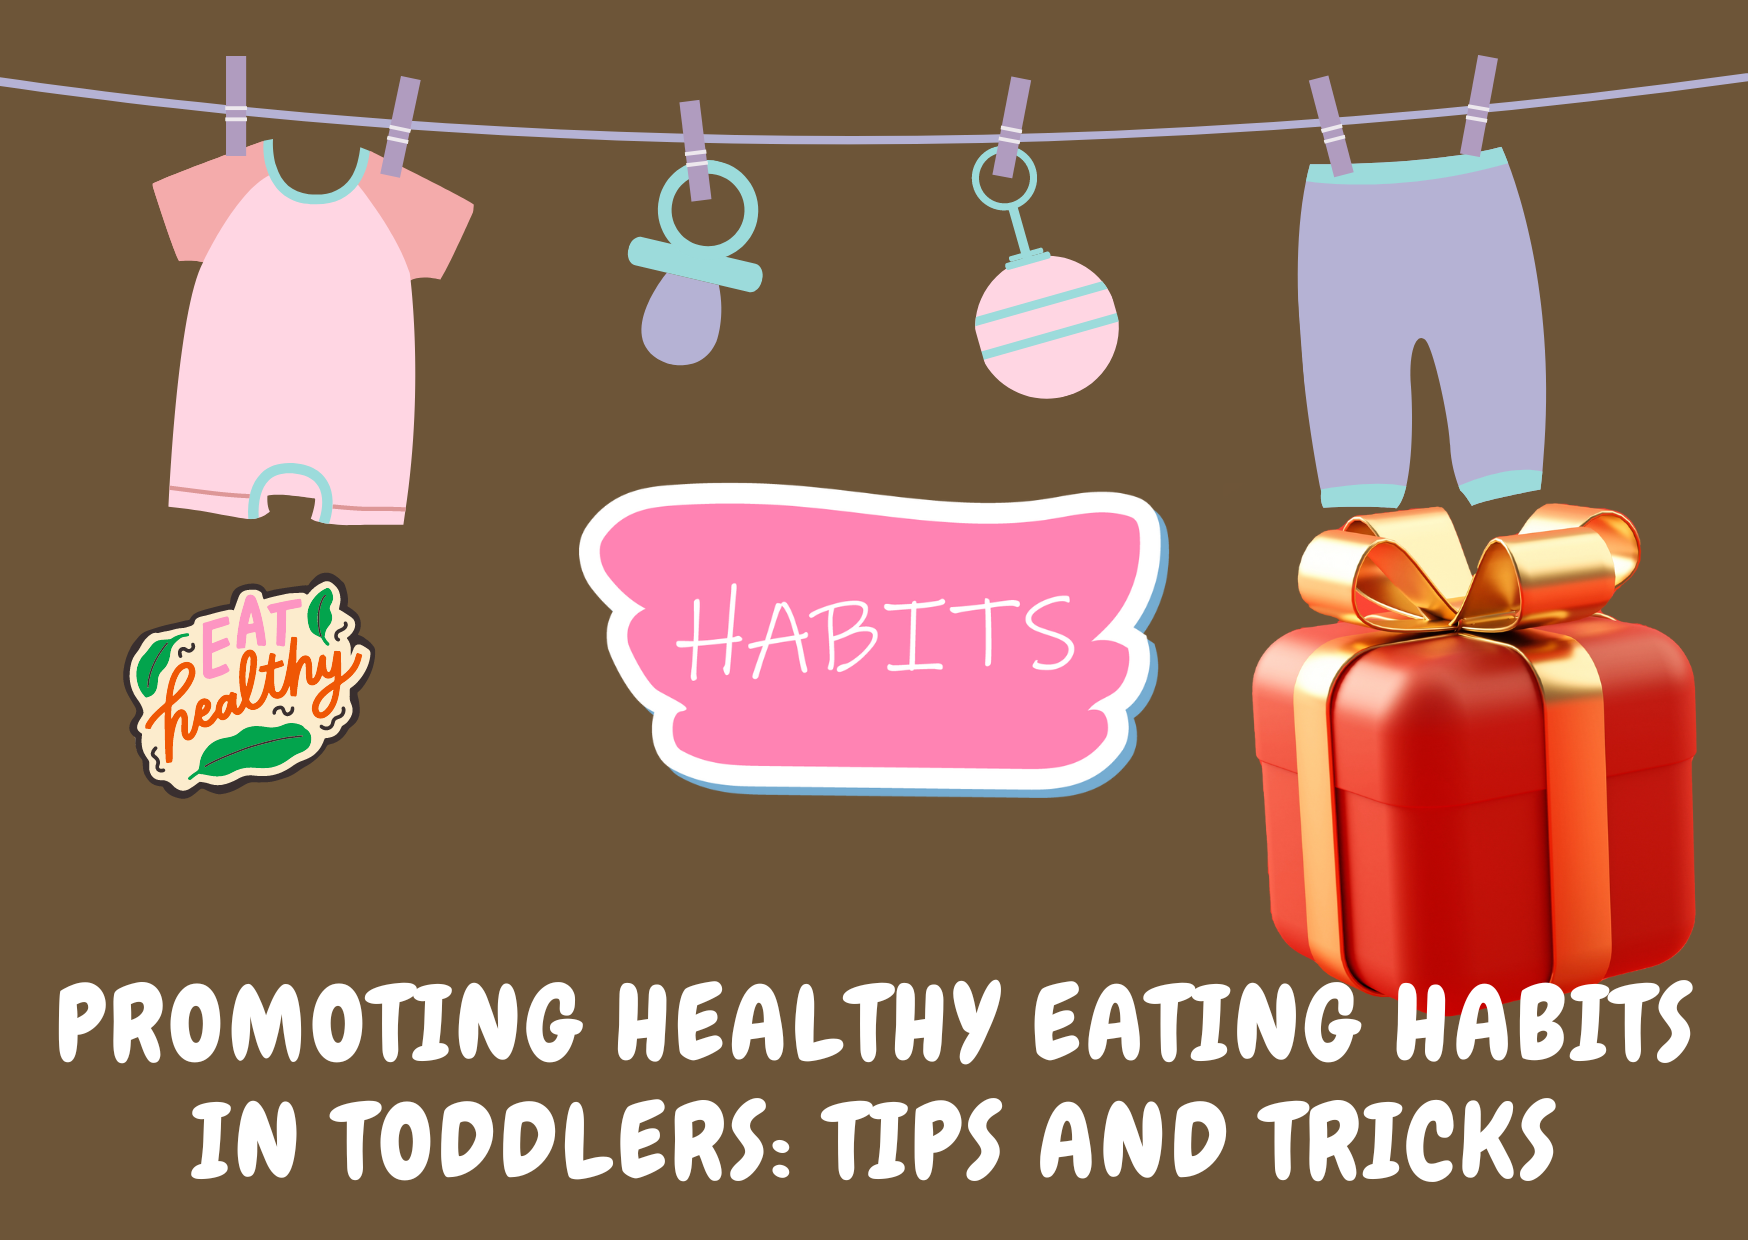 Promoting Healthy Eating Habits in Toddlers: Tips and Tricks